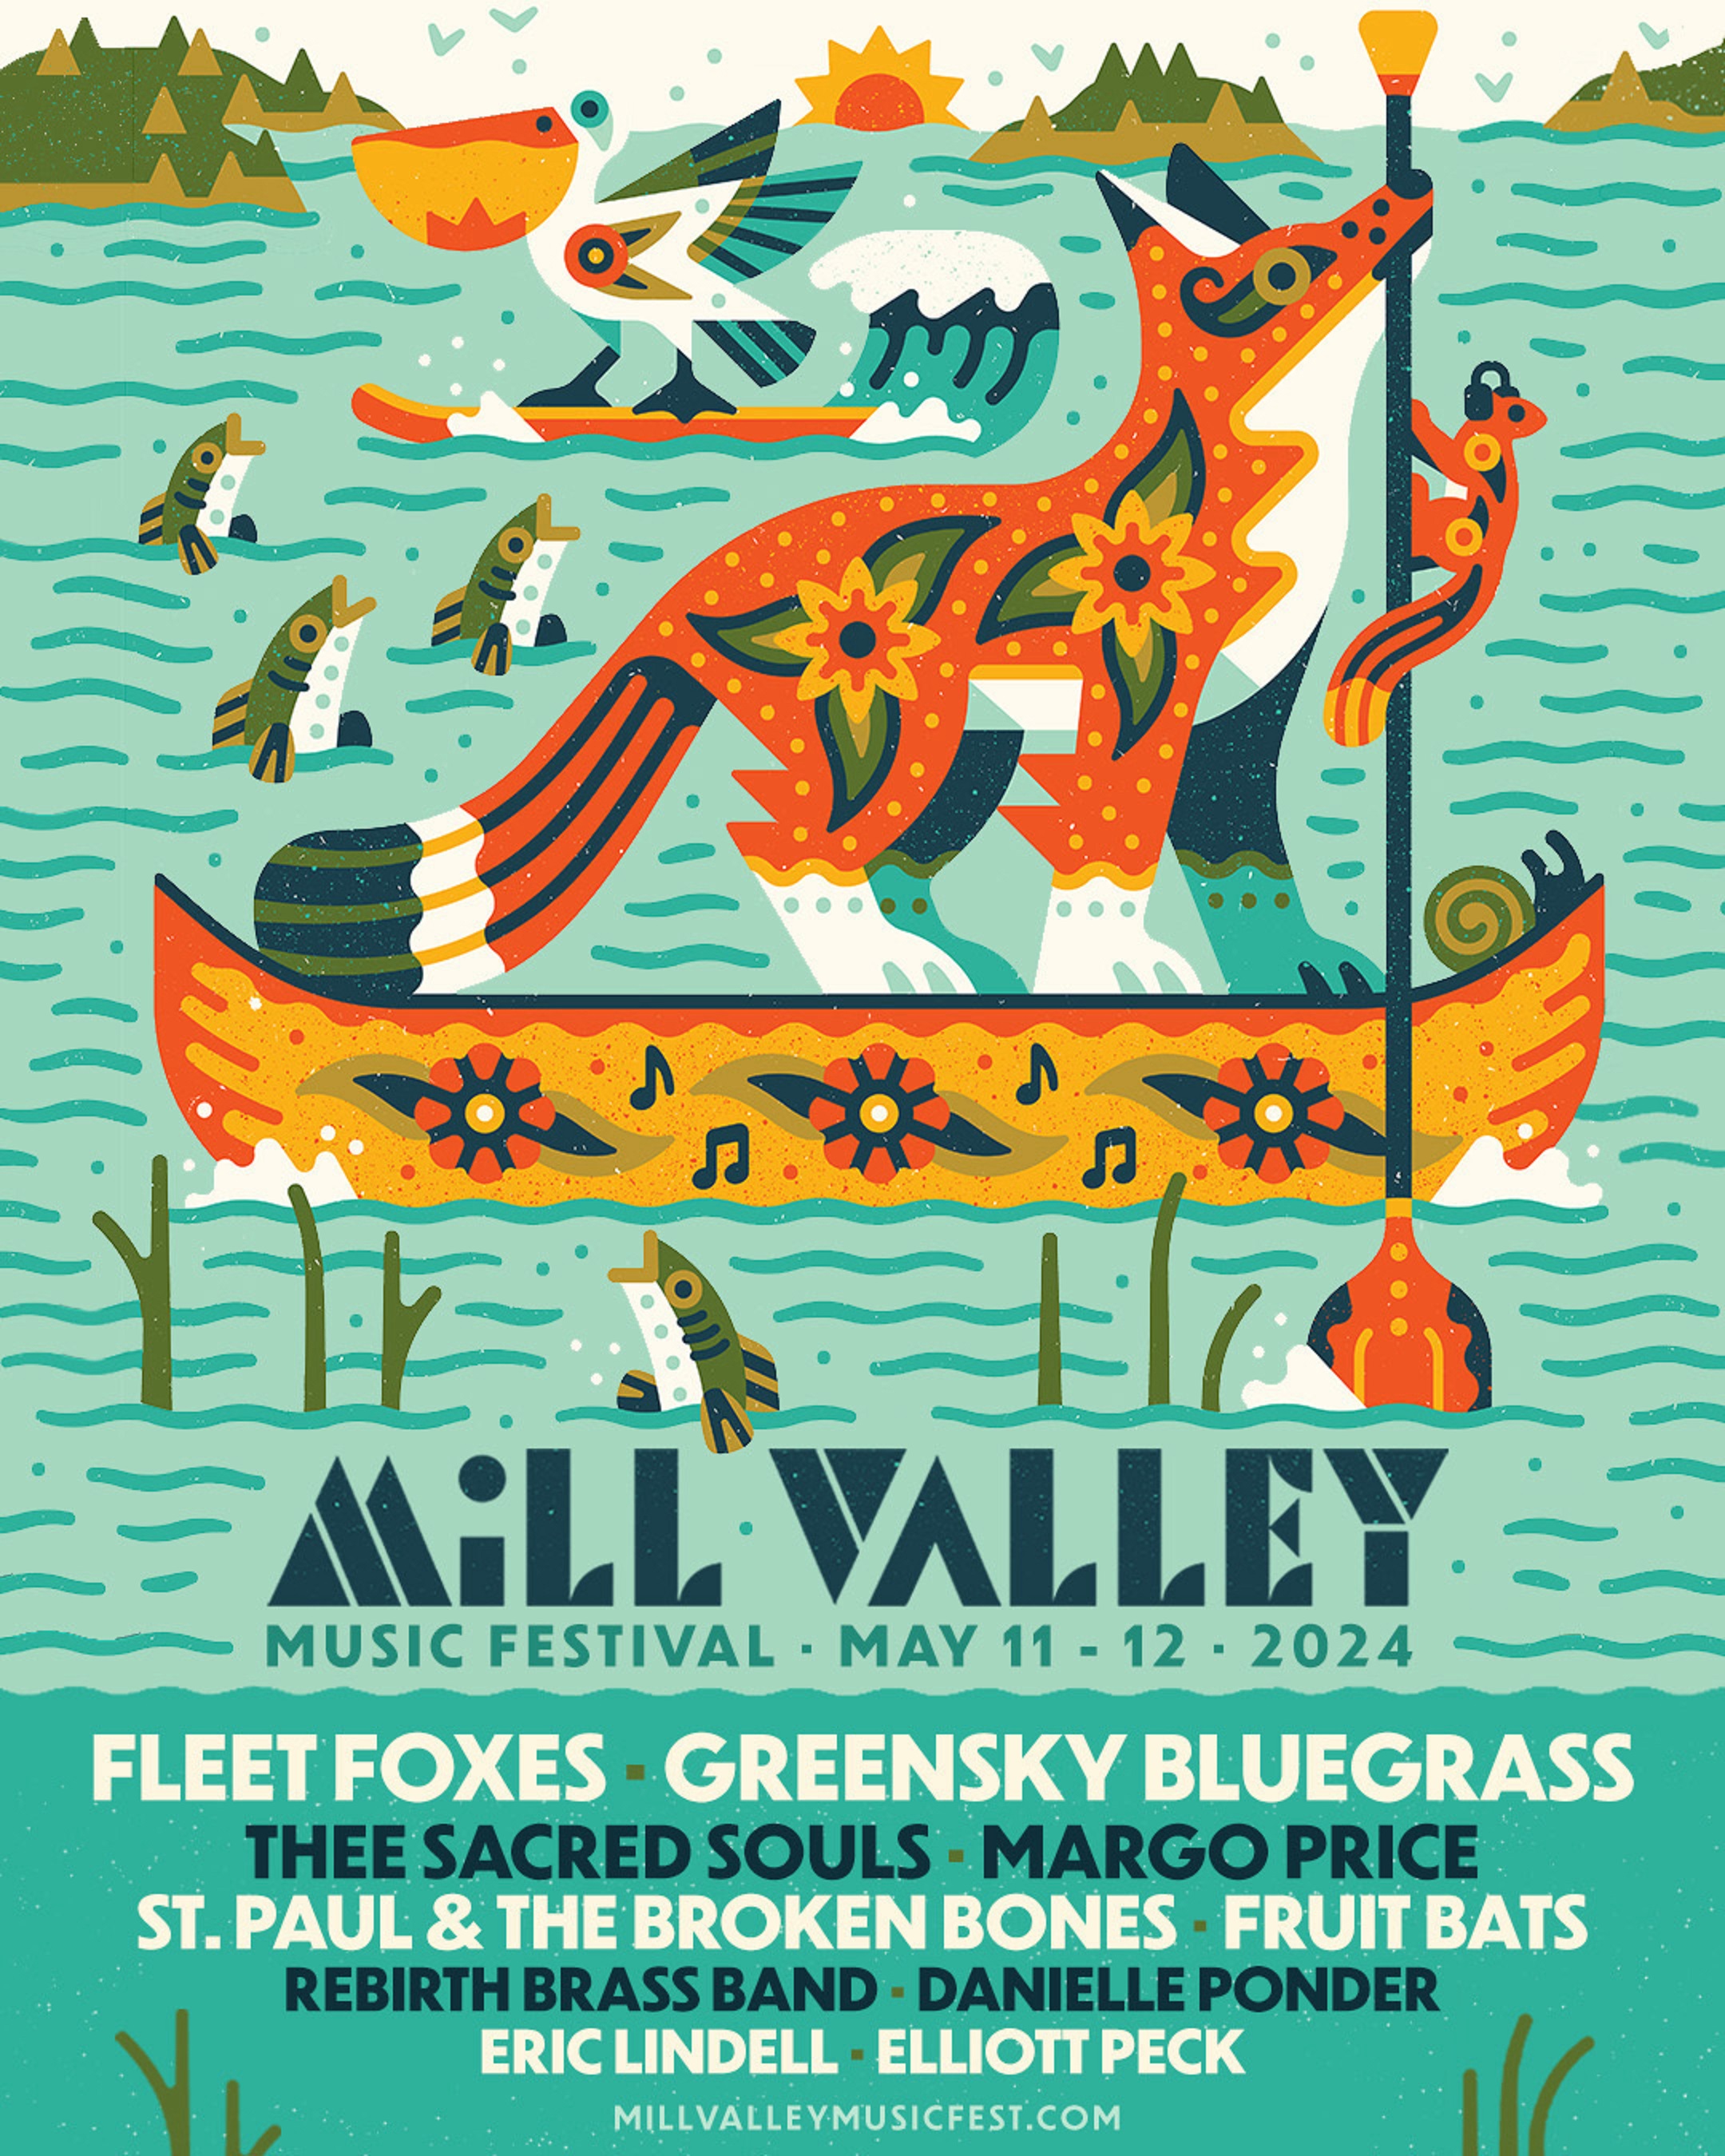 MILL VALLEY MUSIC FESTIVAL ANNOUNCES 2024 LINEUP